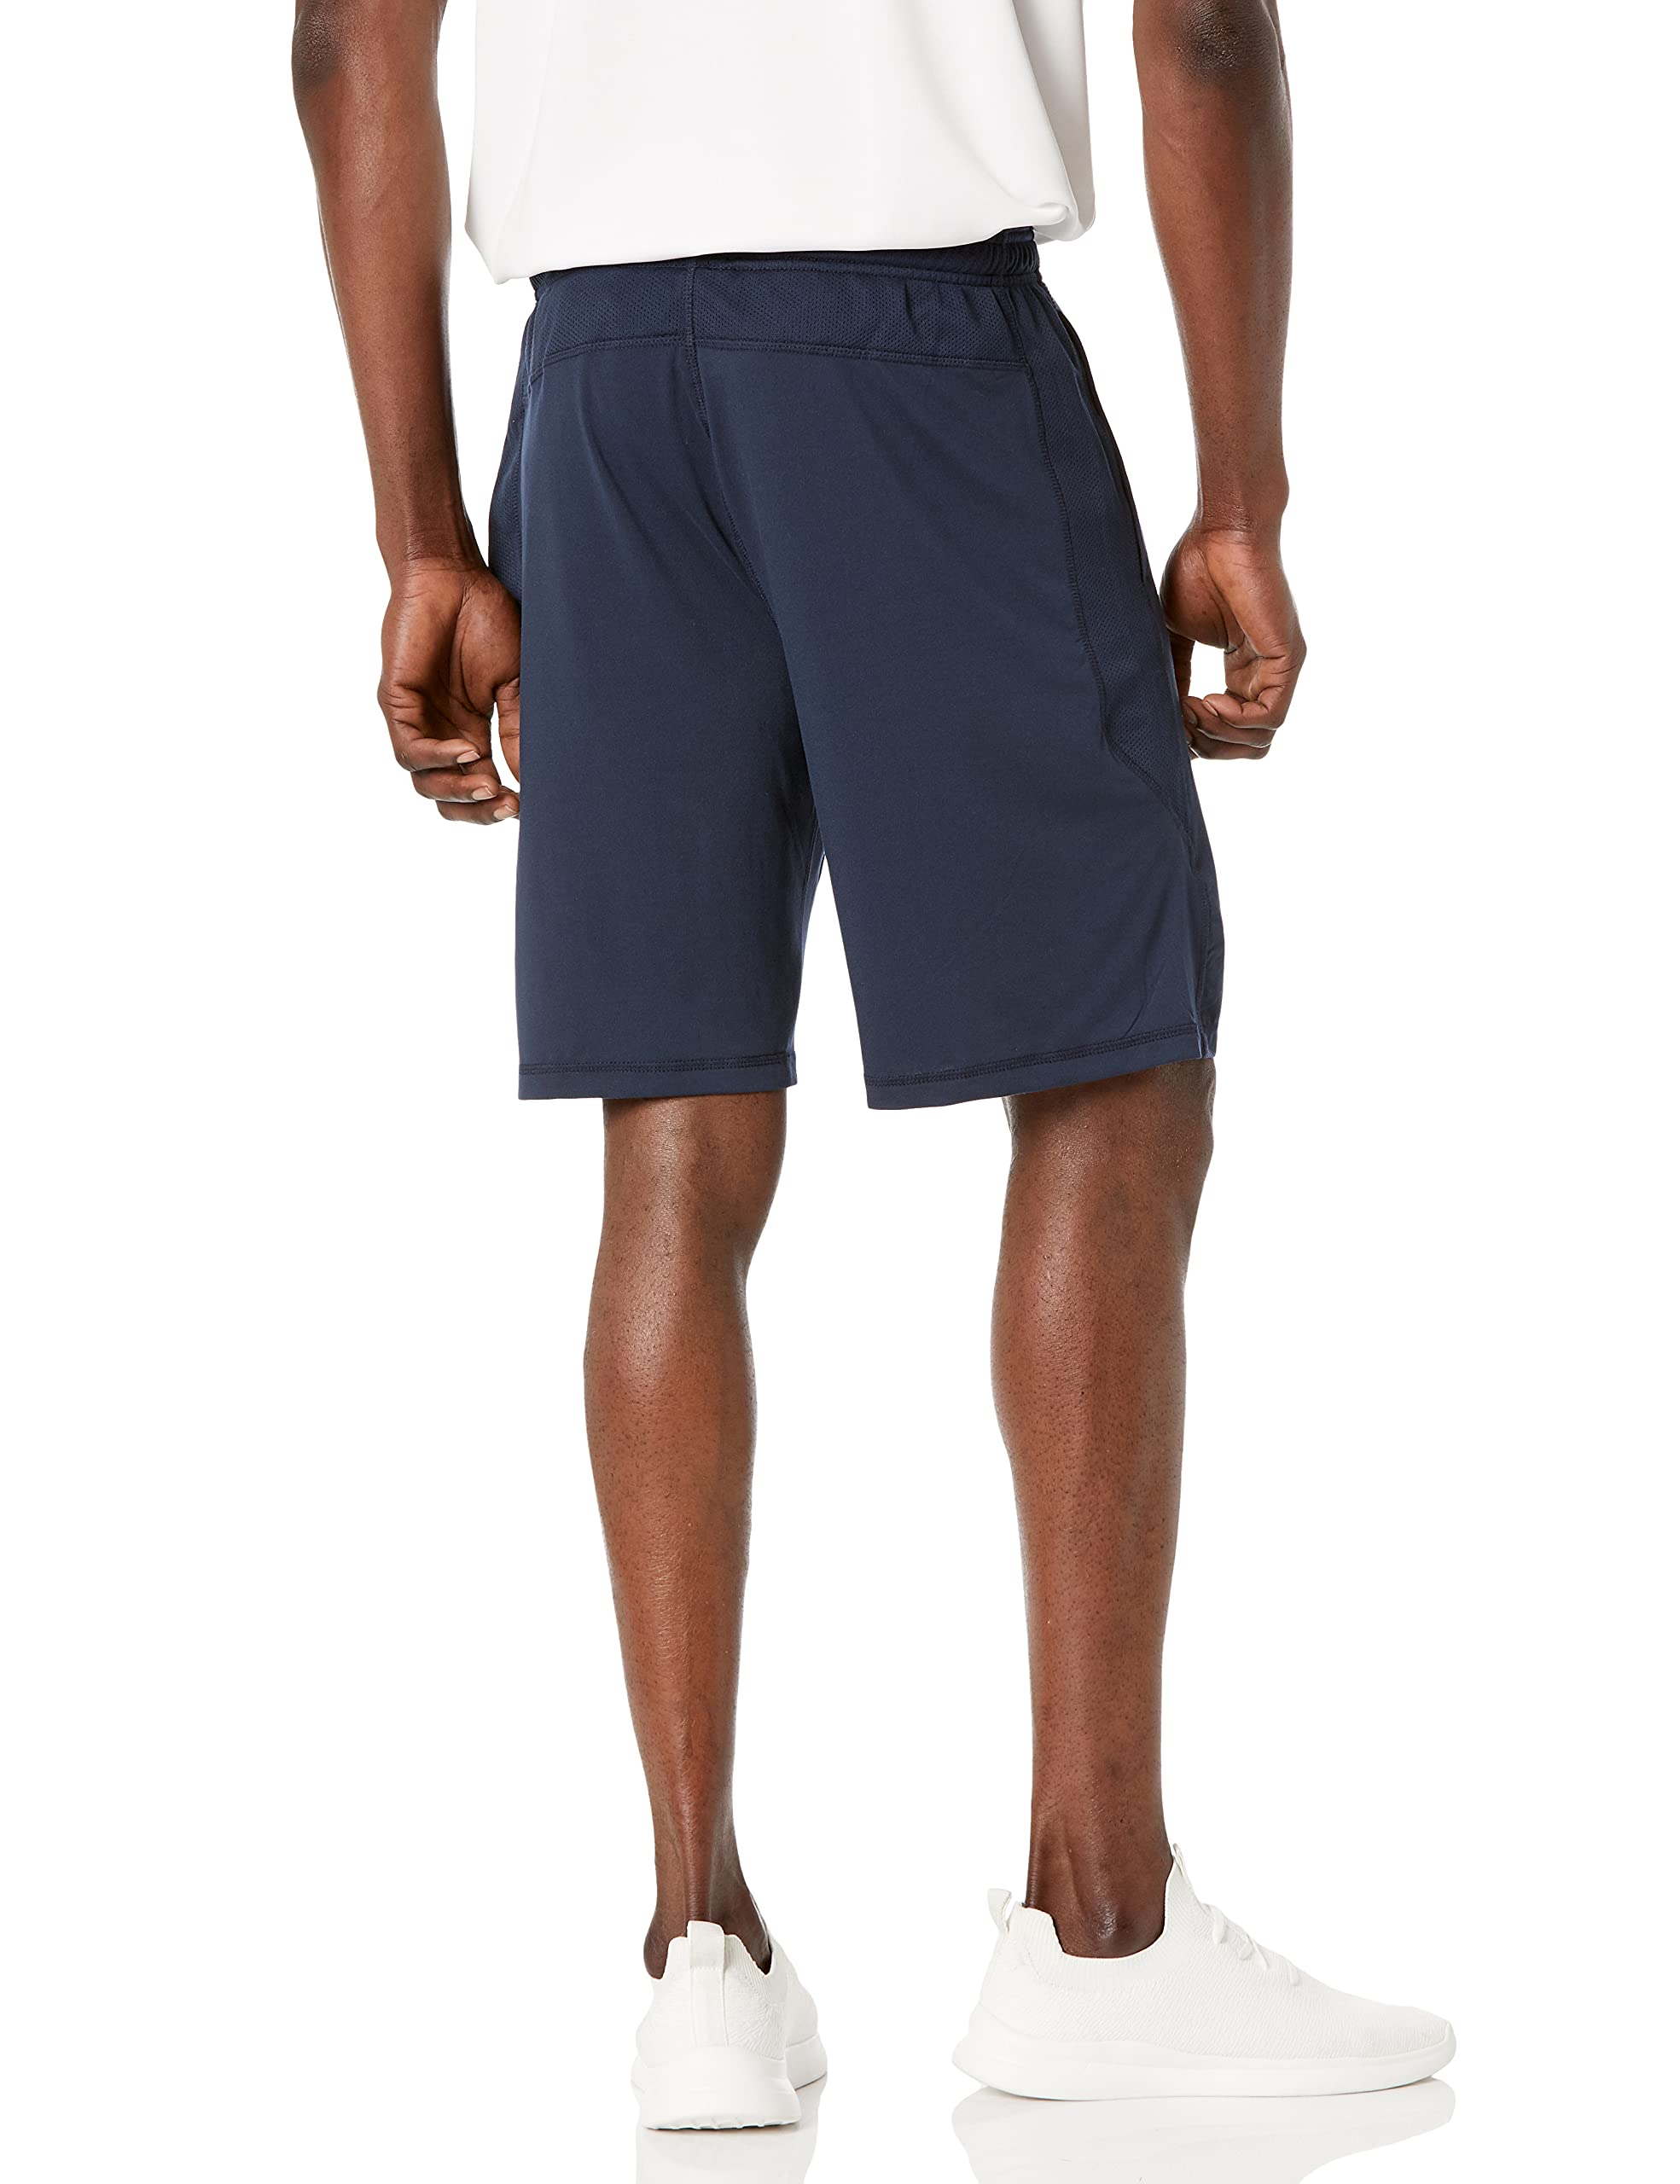 Amazon Essentials Men's Tech Stretch Training Short (Available in Big & Tall)